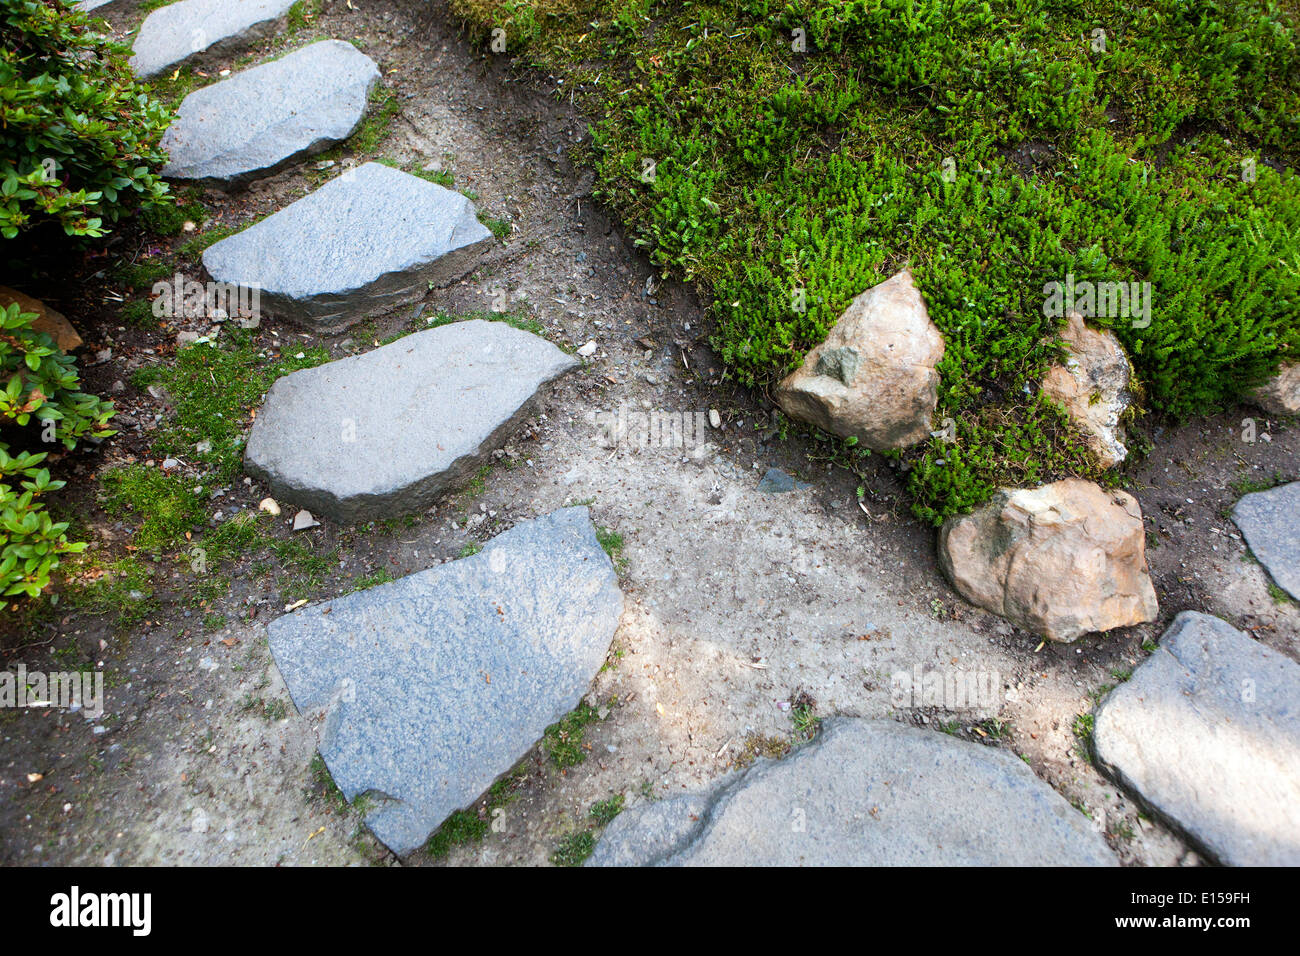 Garden path, Stepping stones in grassy green lawn Stock Photo